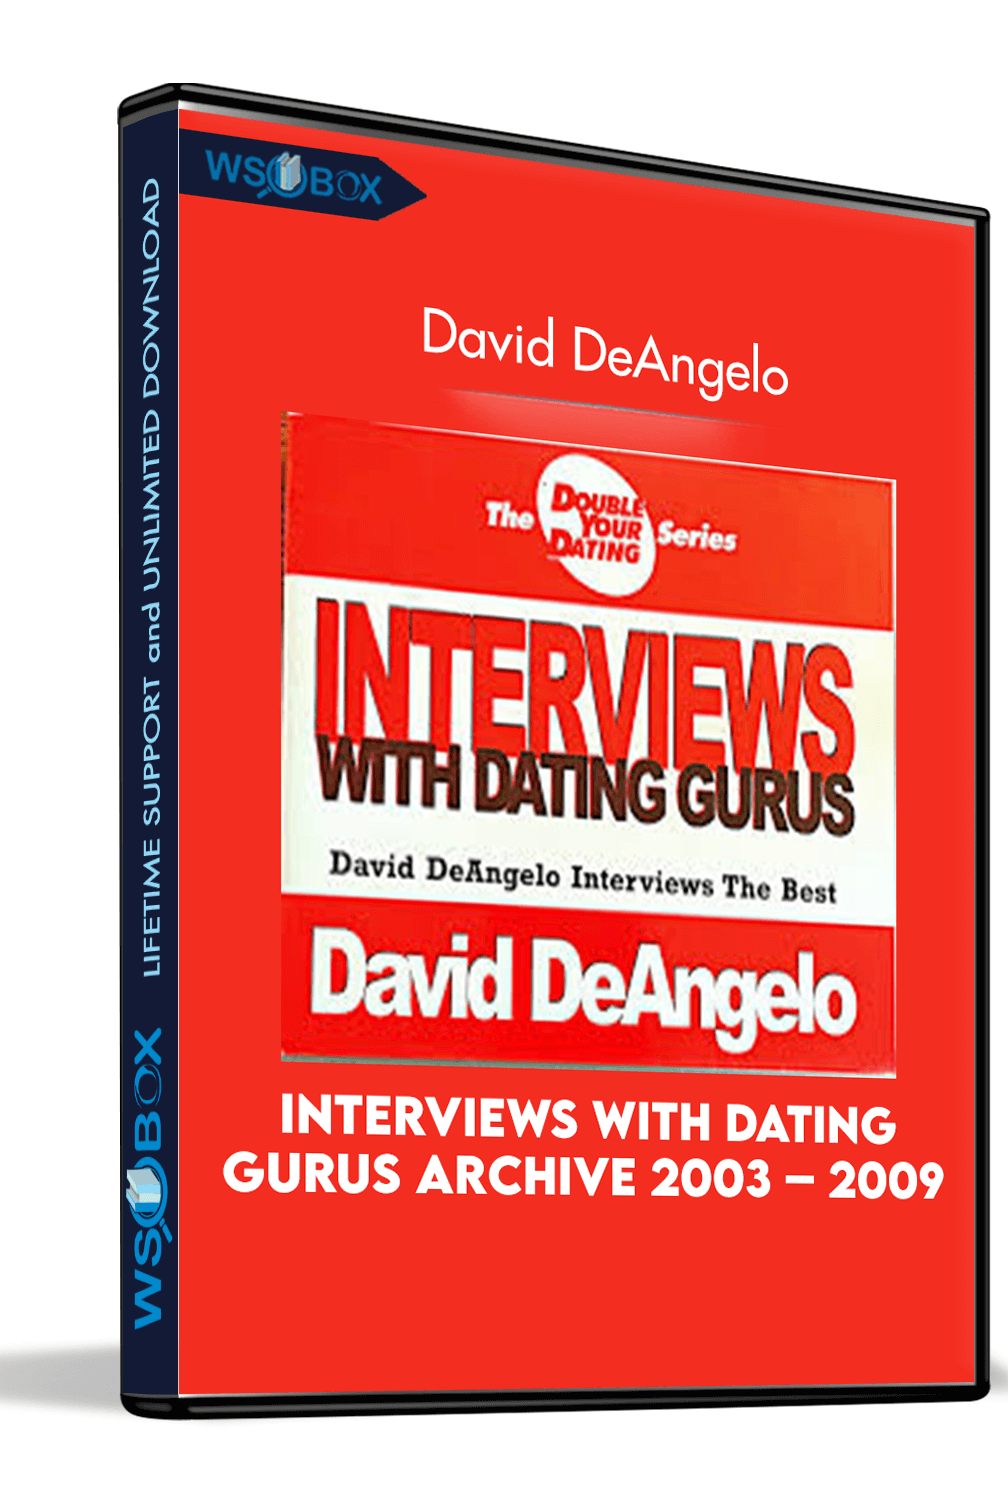 interviews-with-dating-gurus-archive-2003-2009-david-deangelo